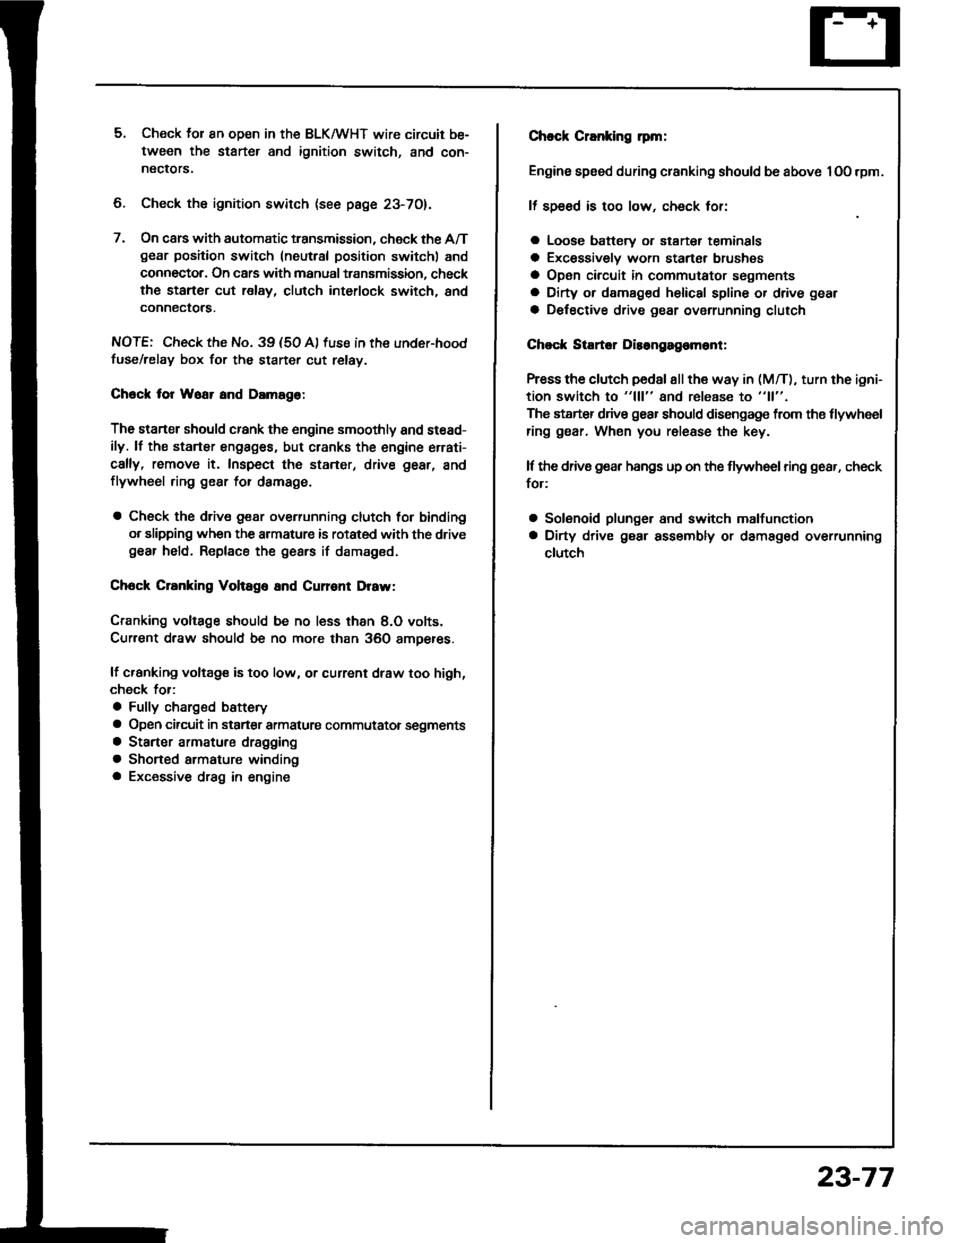 ACURA INTEGRA 1994  Service Repair Manual 5. Check lor 8n op€n in the BLKMHT wire circuit be-
tween the staner and ignition switch, and con-
nectors.
6. Check the ignition switch (see page 23-70).
7, On cars with automatic transmission, che